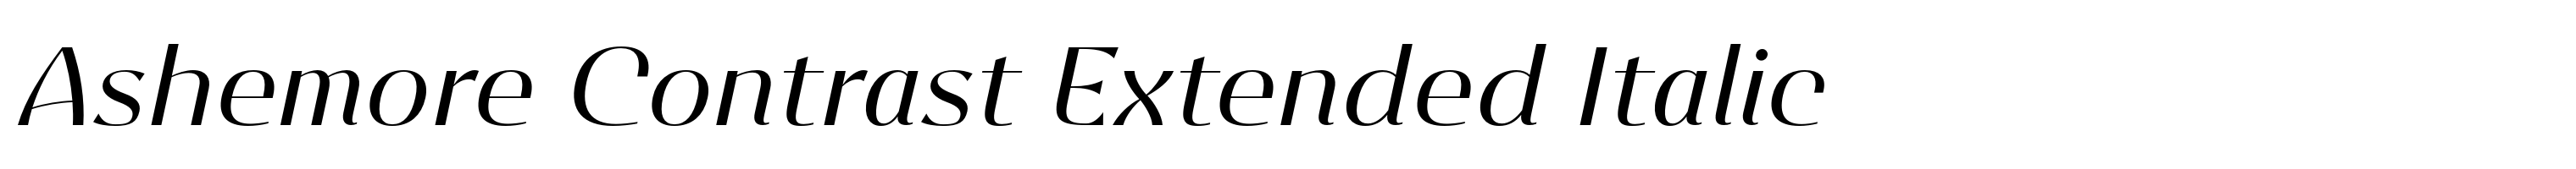 Ashemore Contrast Extended Italic